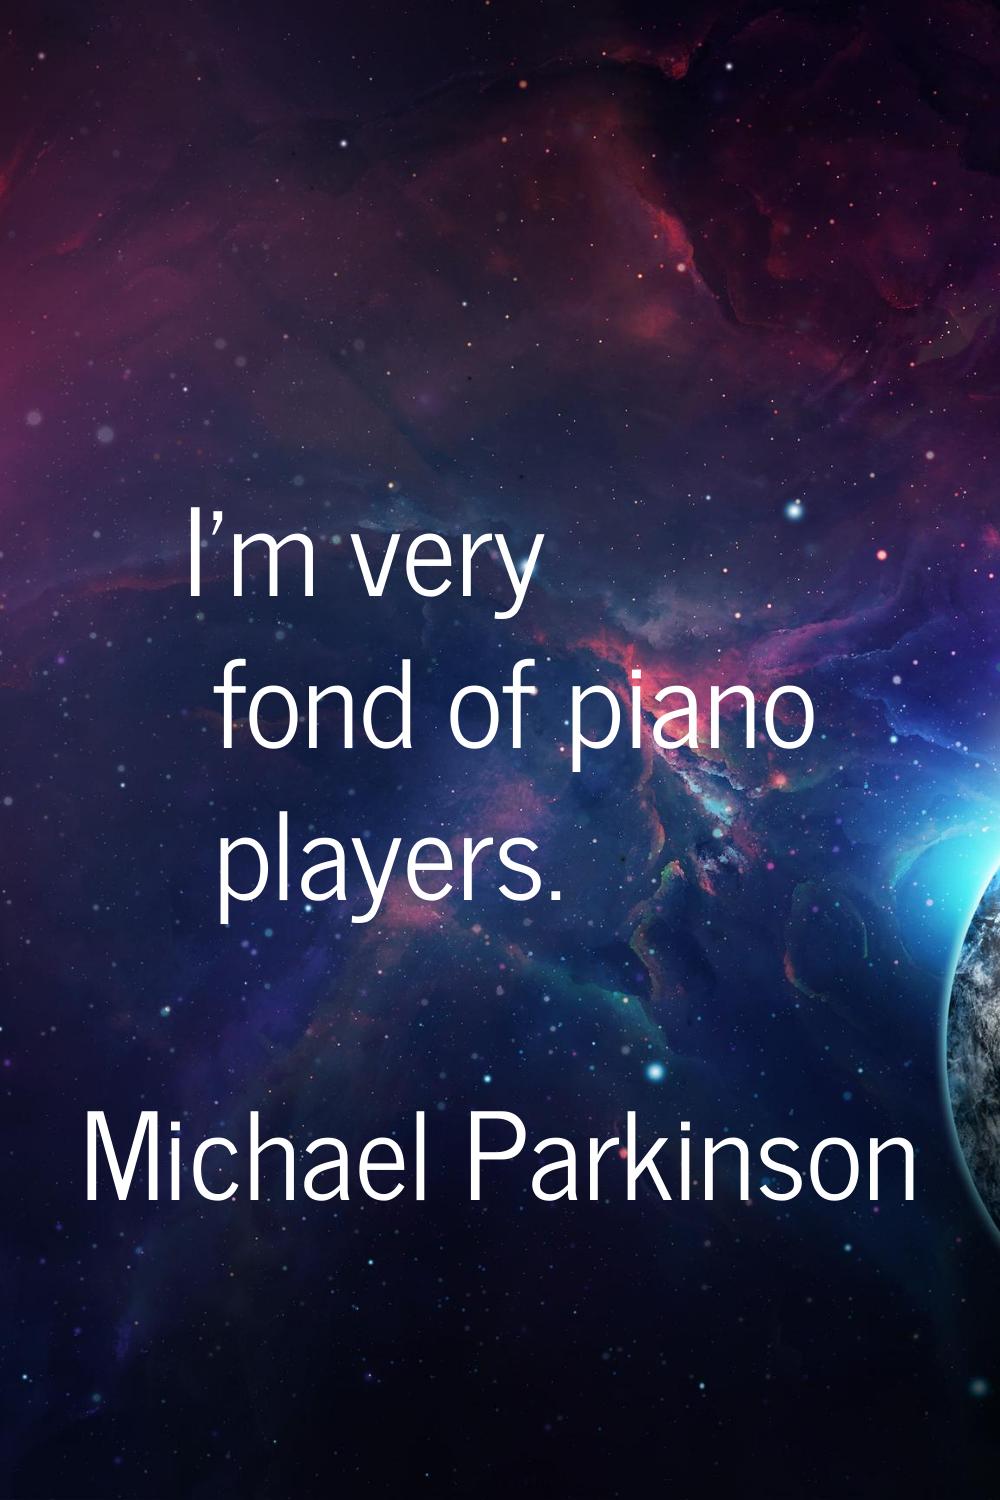 I'm very fond of piano players.